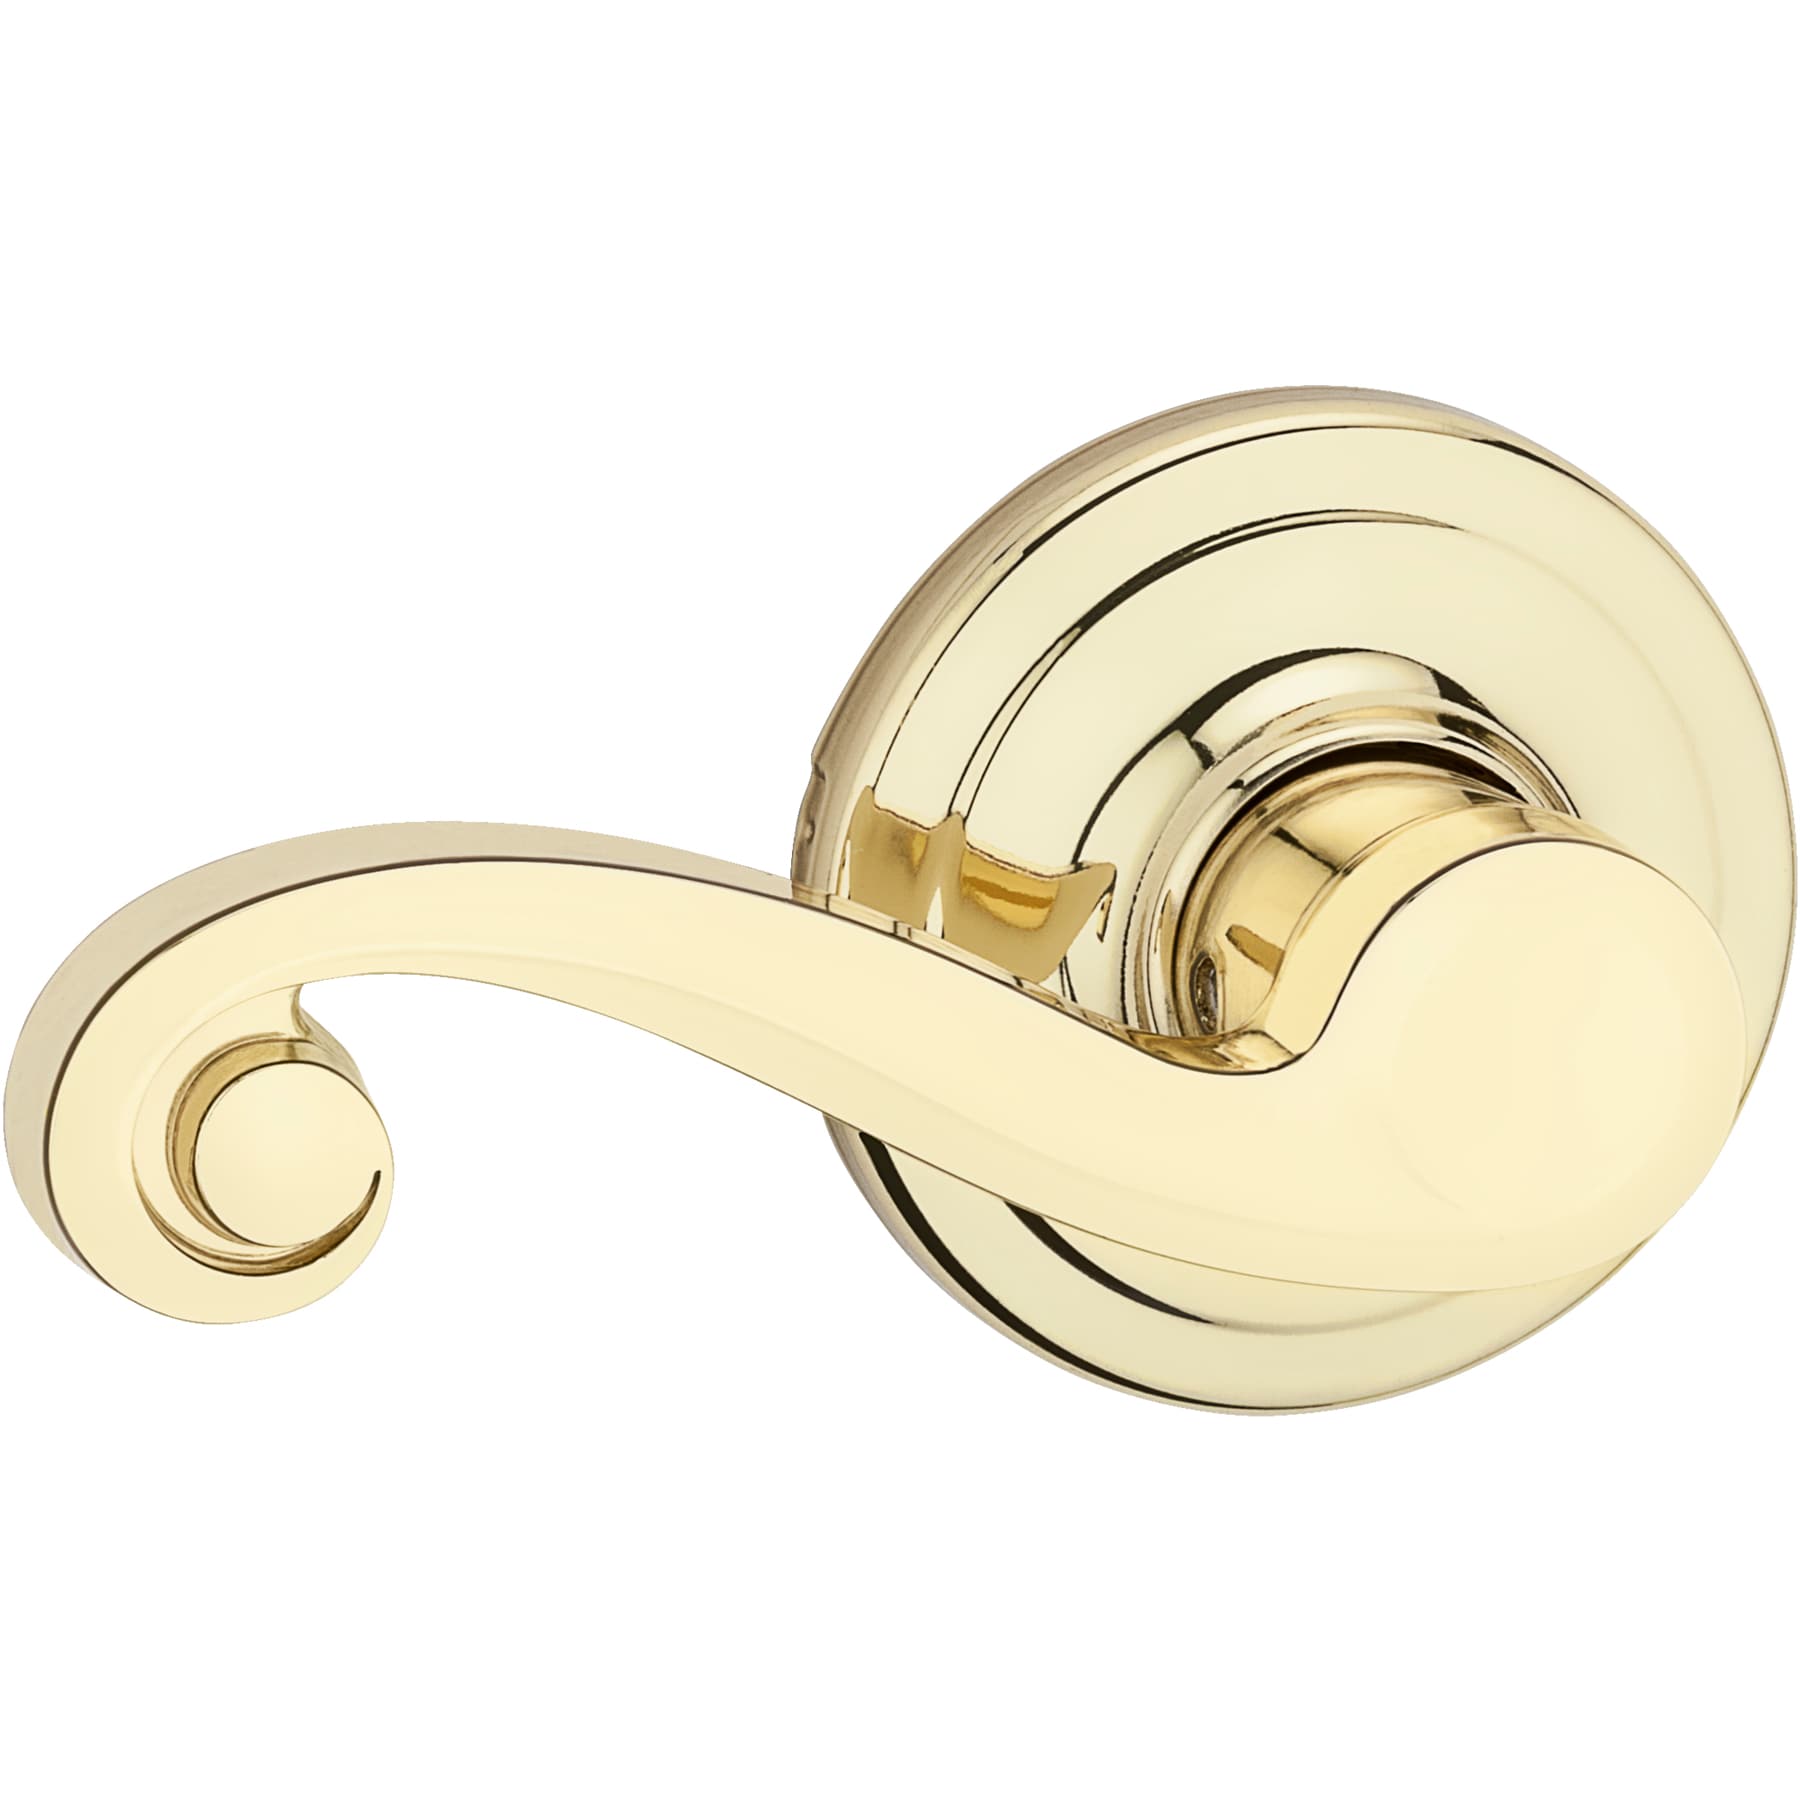 2 Two Kwikset Lido Hall and Closet Lever Polished Brass 720LL door handles 